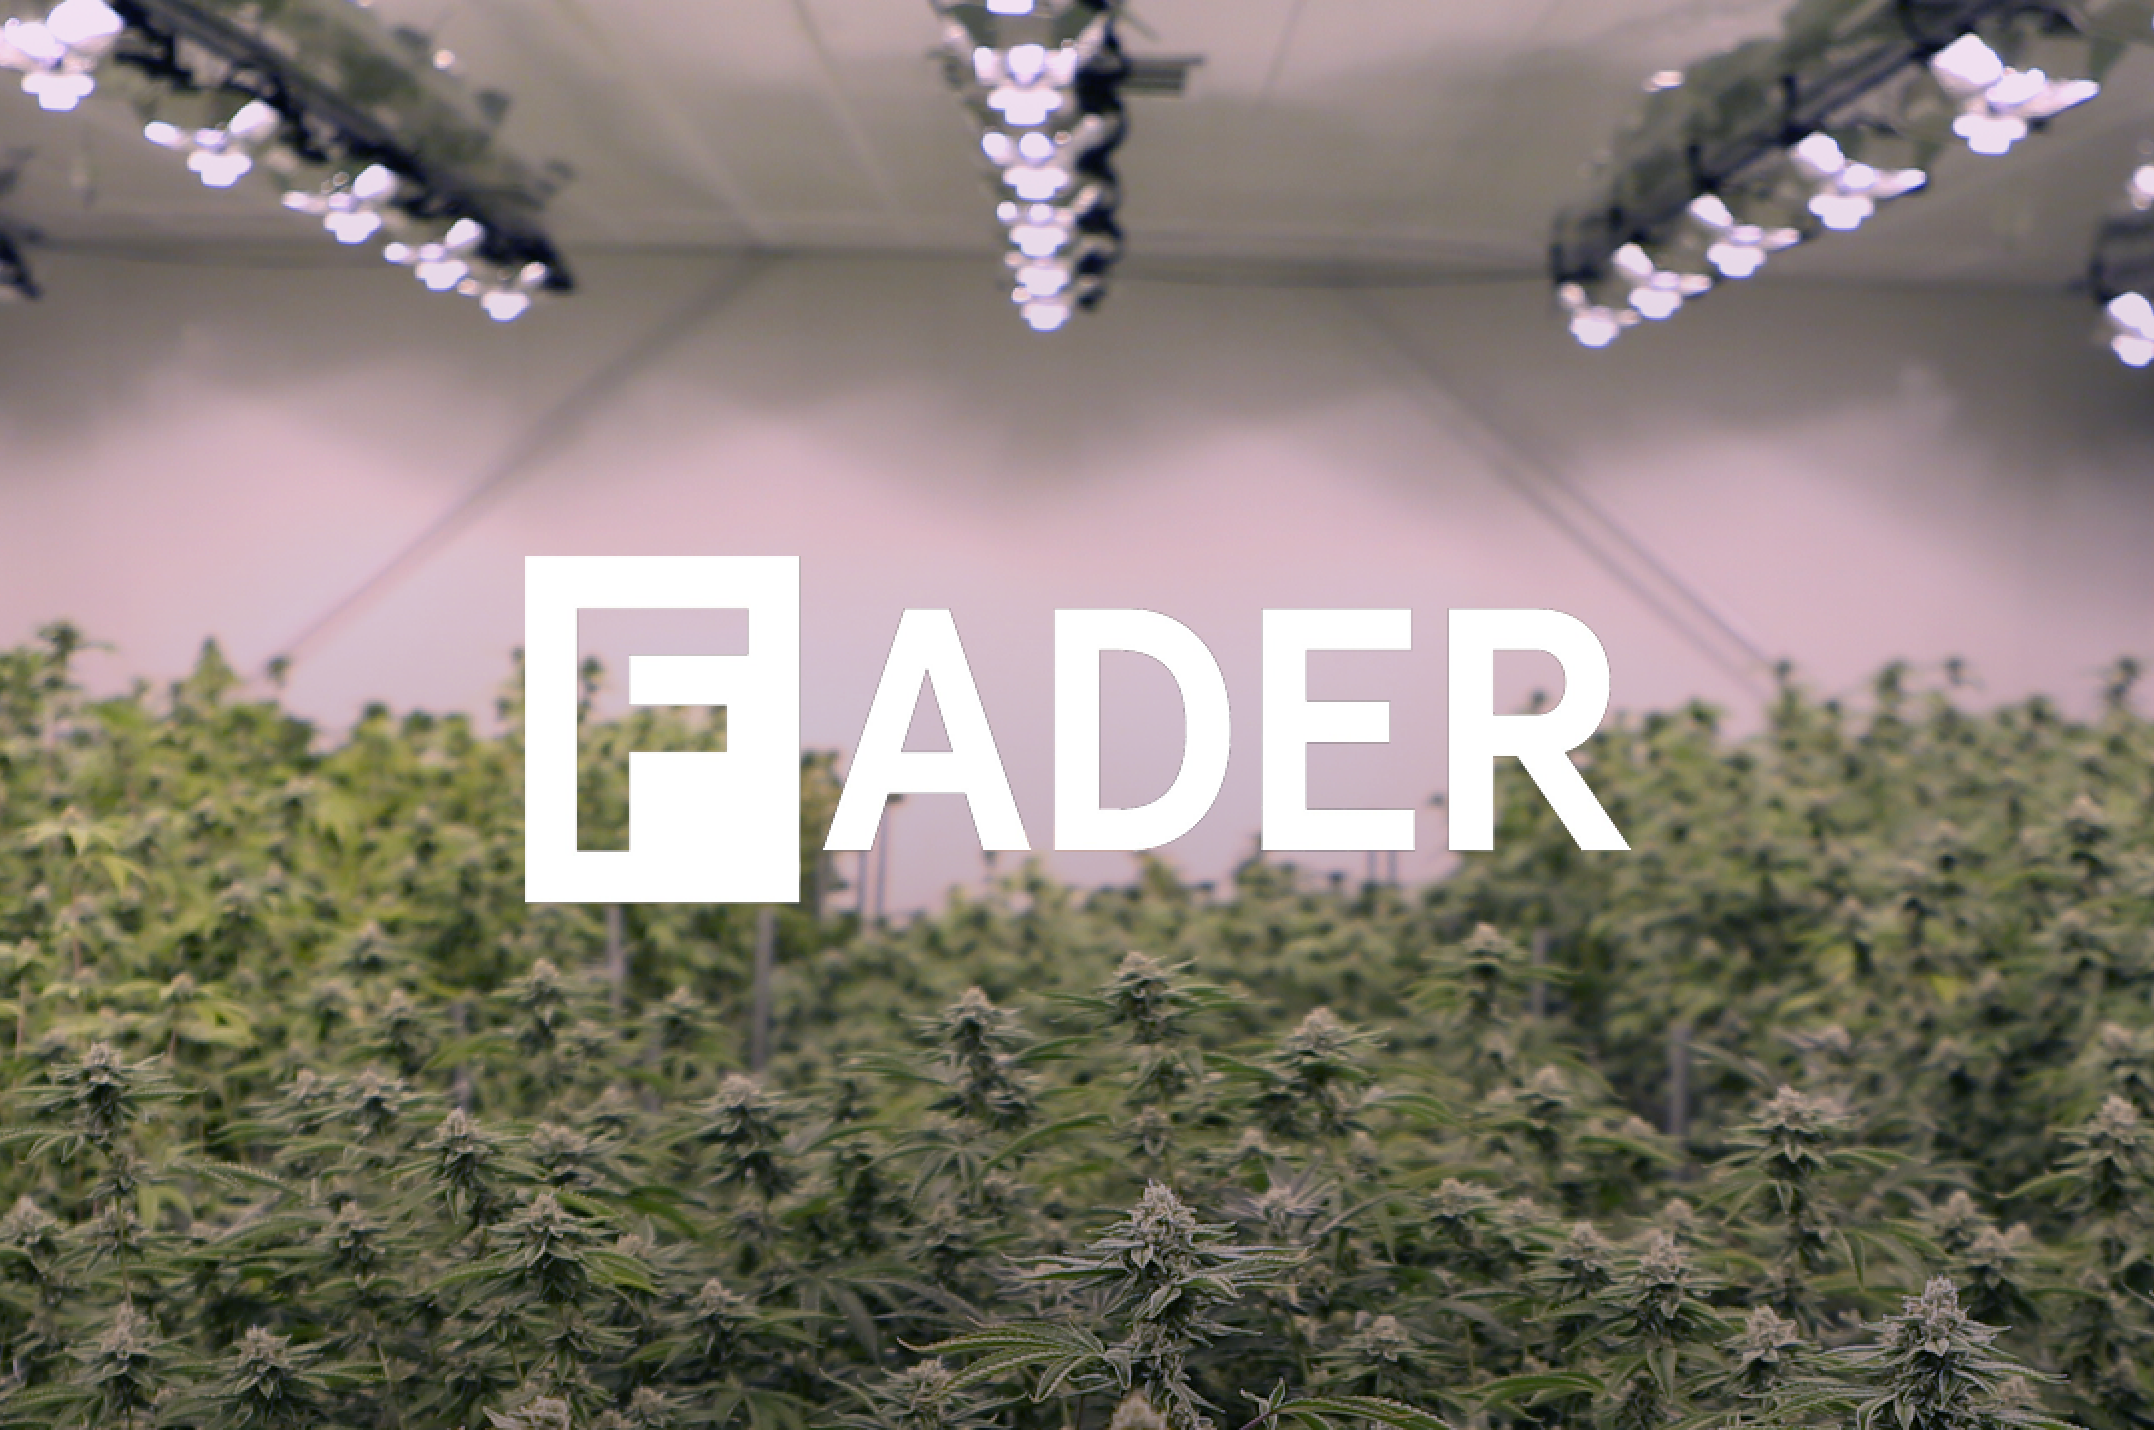 Exclusive: The FADER Launches Its Own Weed Brand Ahead Of Its Famous Annual SXSW Party